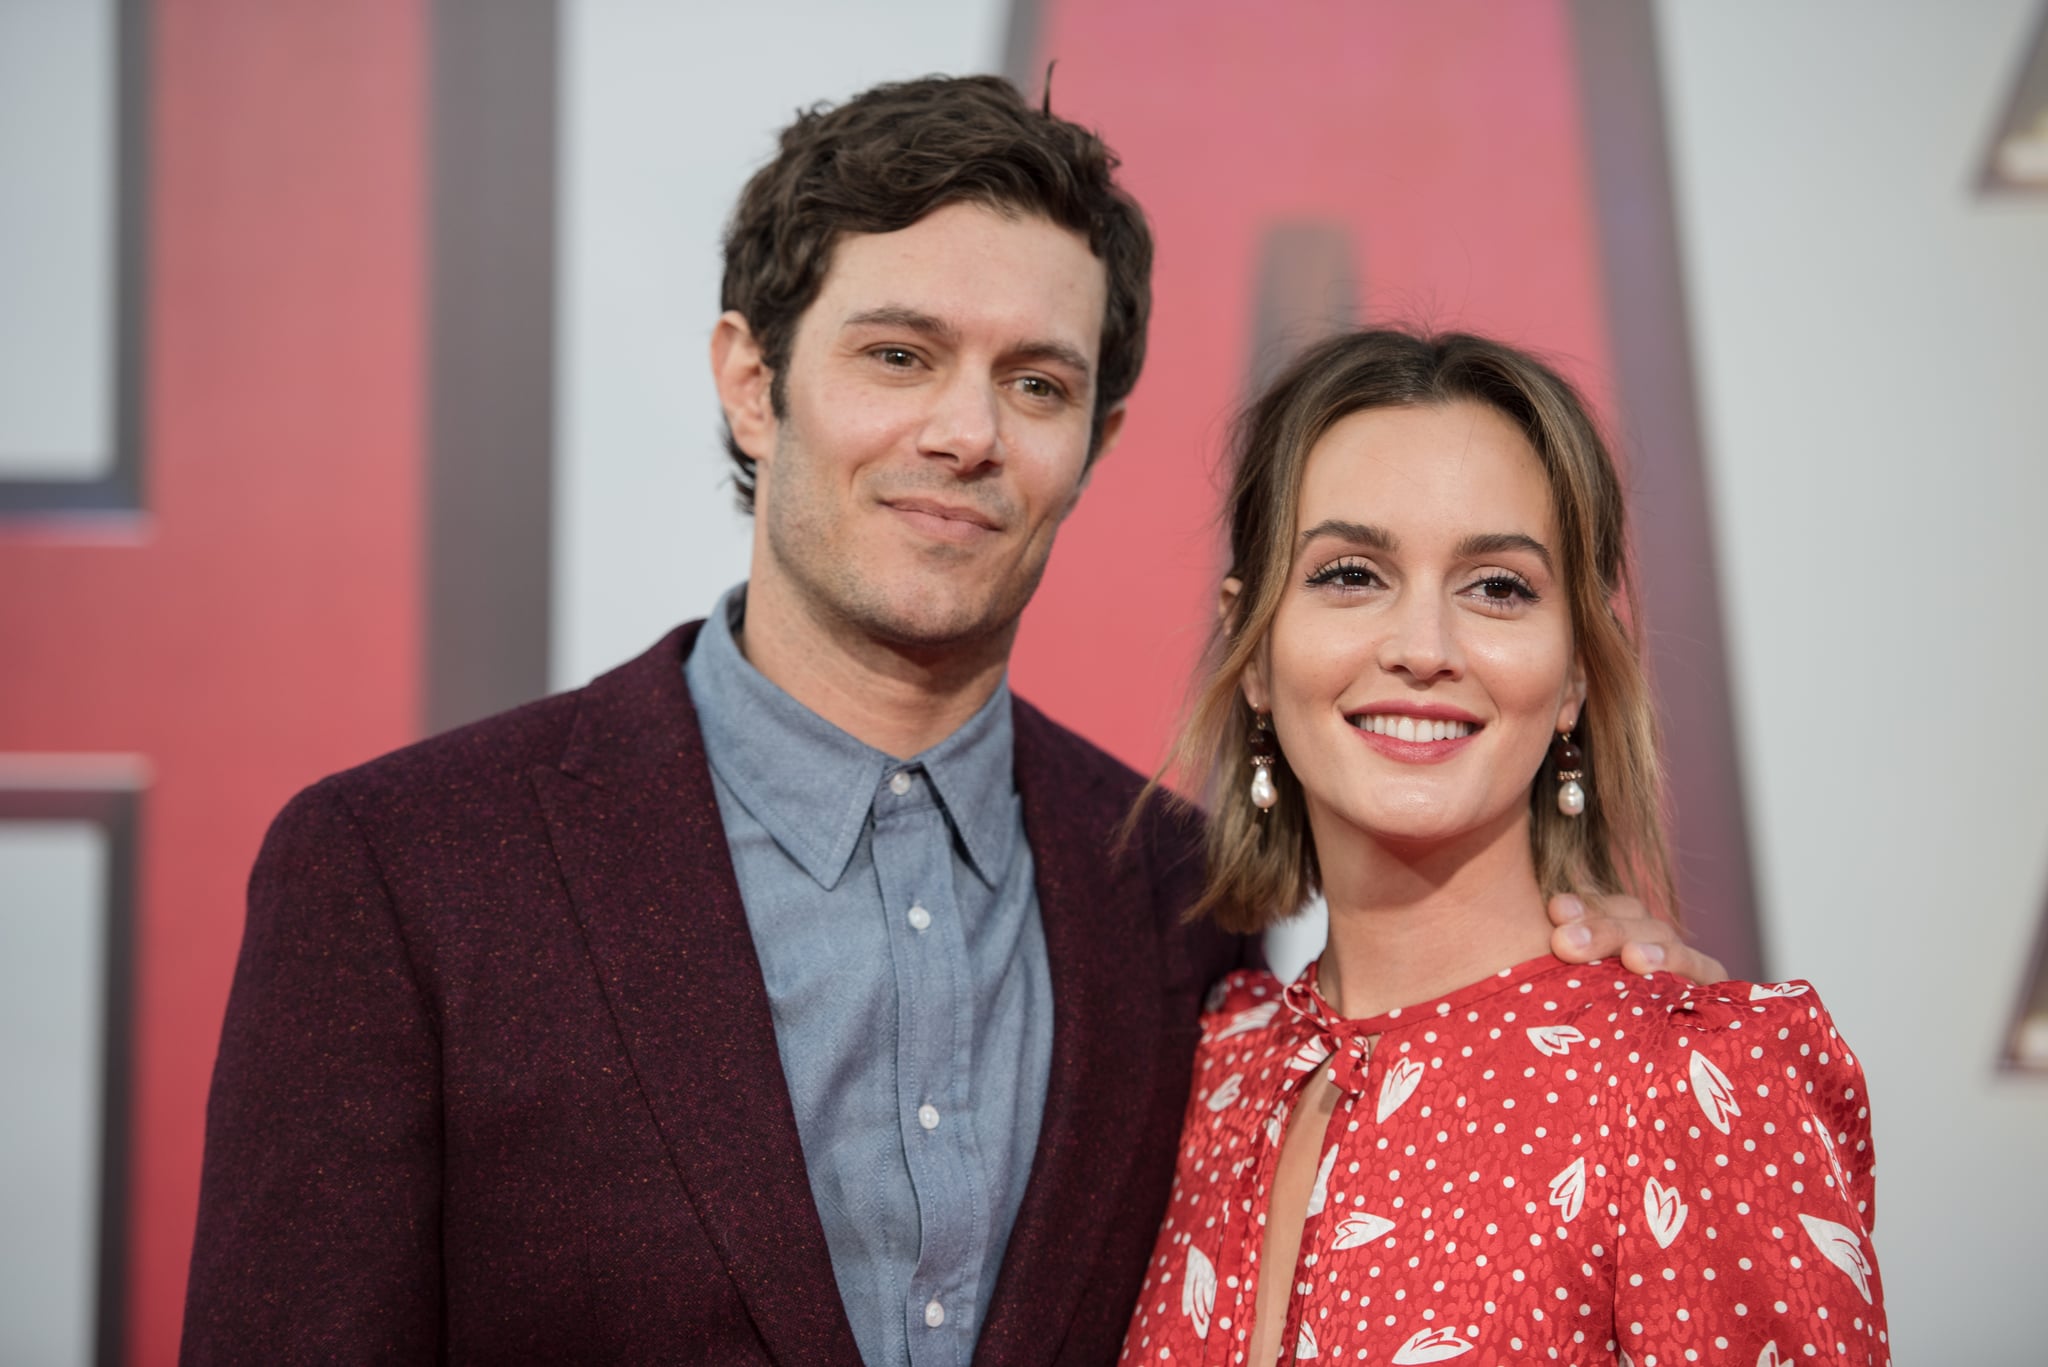 HOLLYWOOD, CALIFORNIA - MARCH 28: Adam Brody and Leighton Meester arrive at Warner Bros. Pictures and New Line Cinema's world premiere of